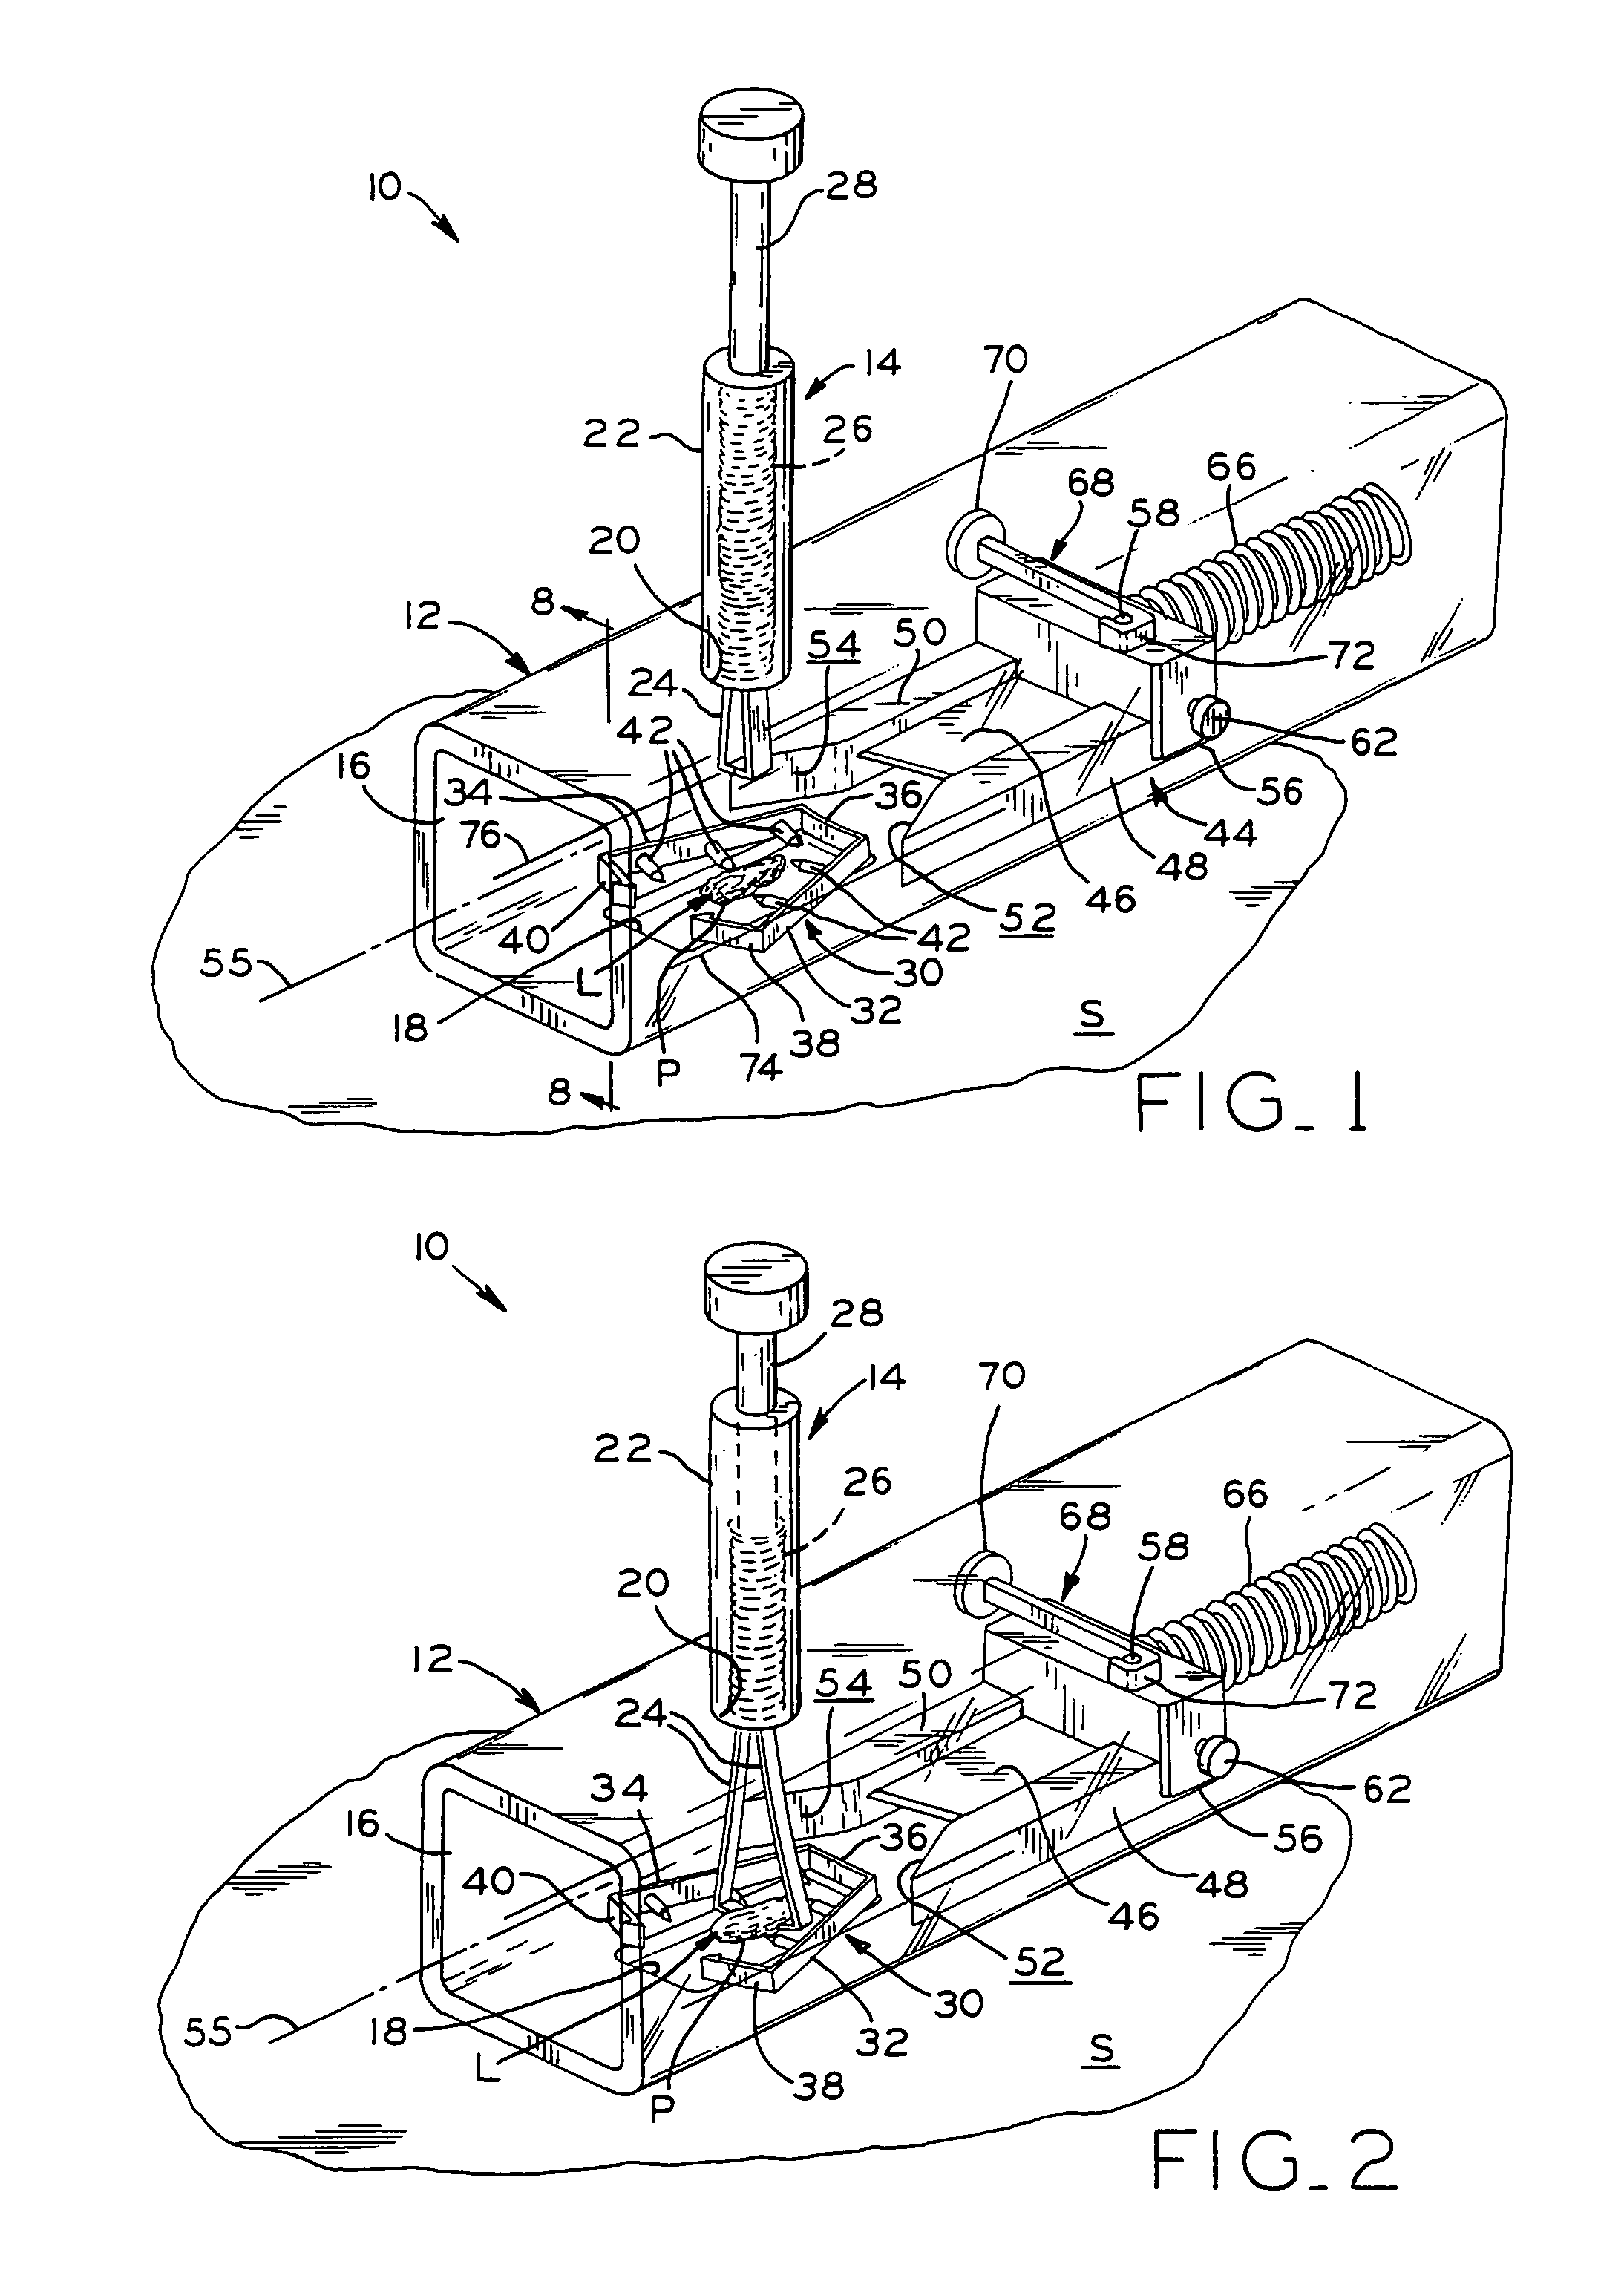 Skin lesion exciser and skin-closure device therefor